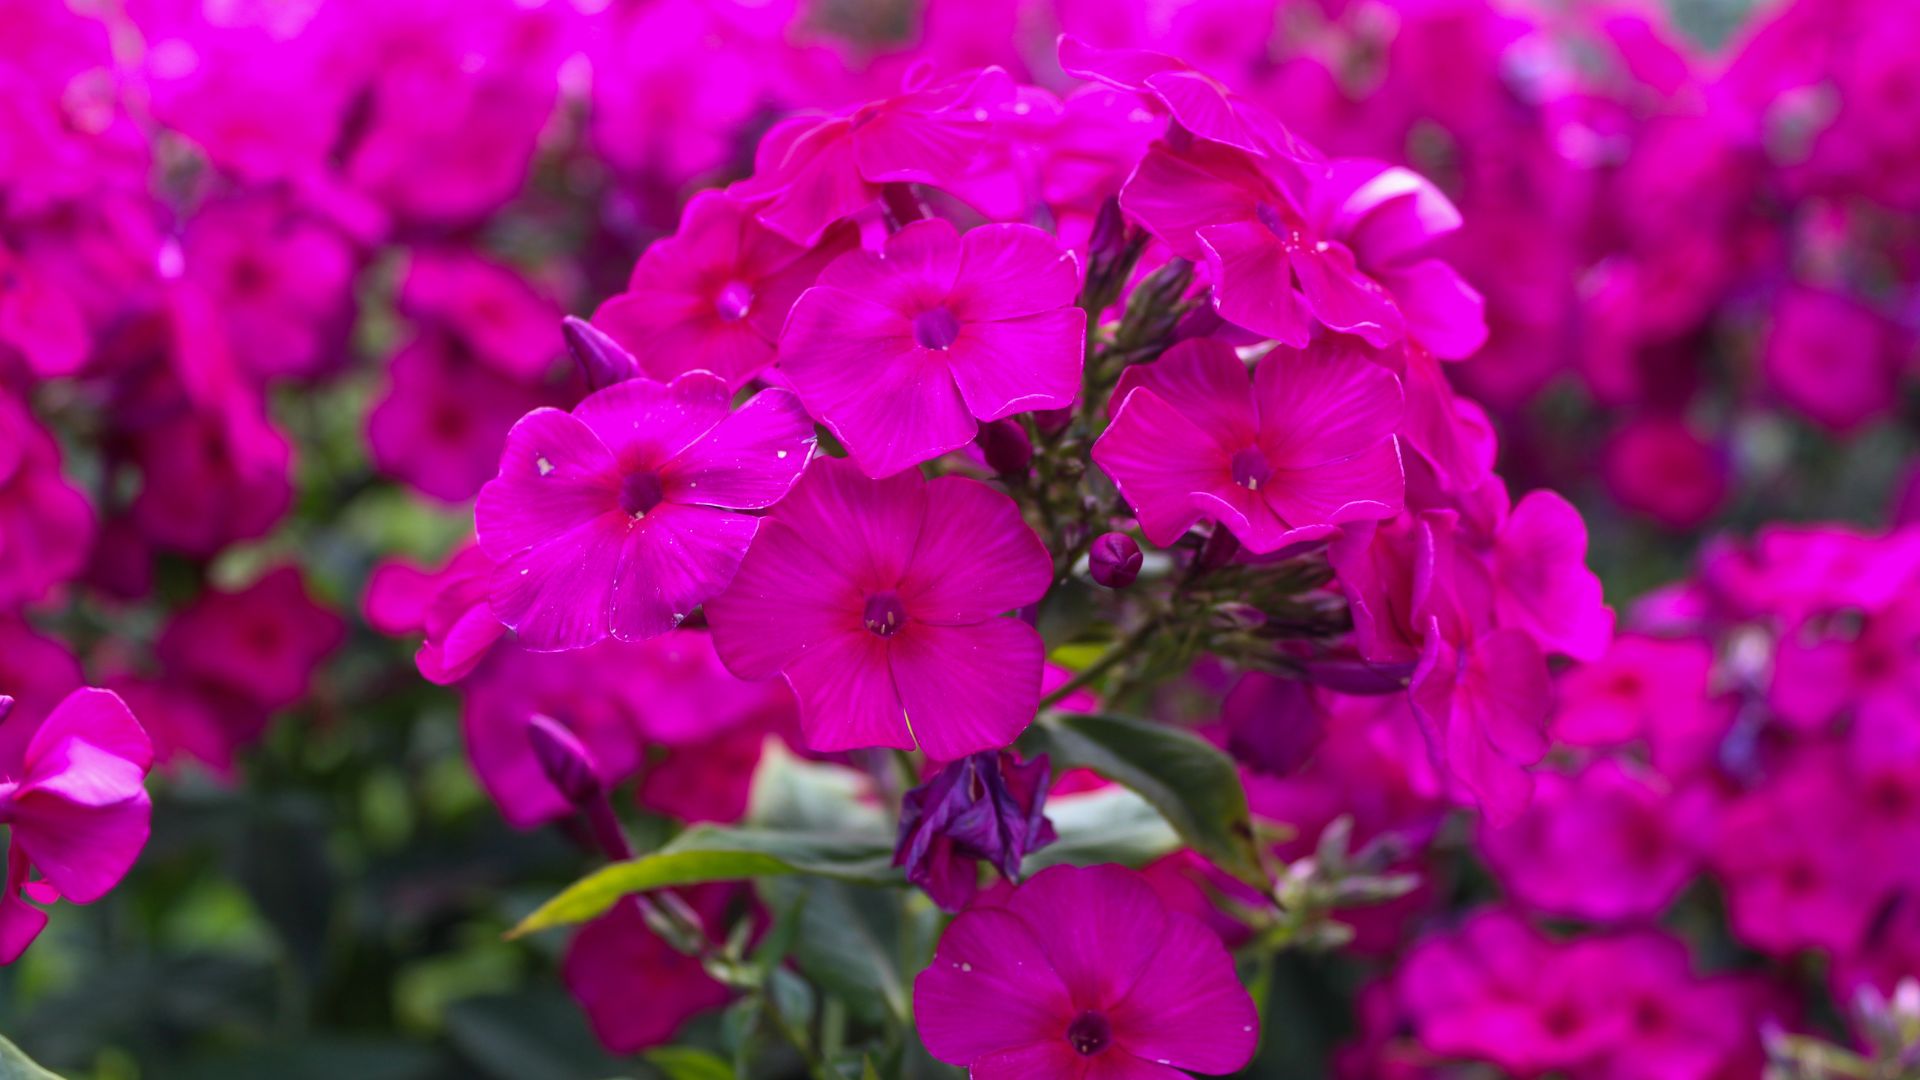 When To Cut Back Phlox, In Spring Or Fall?